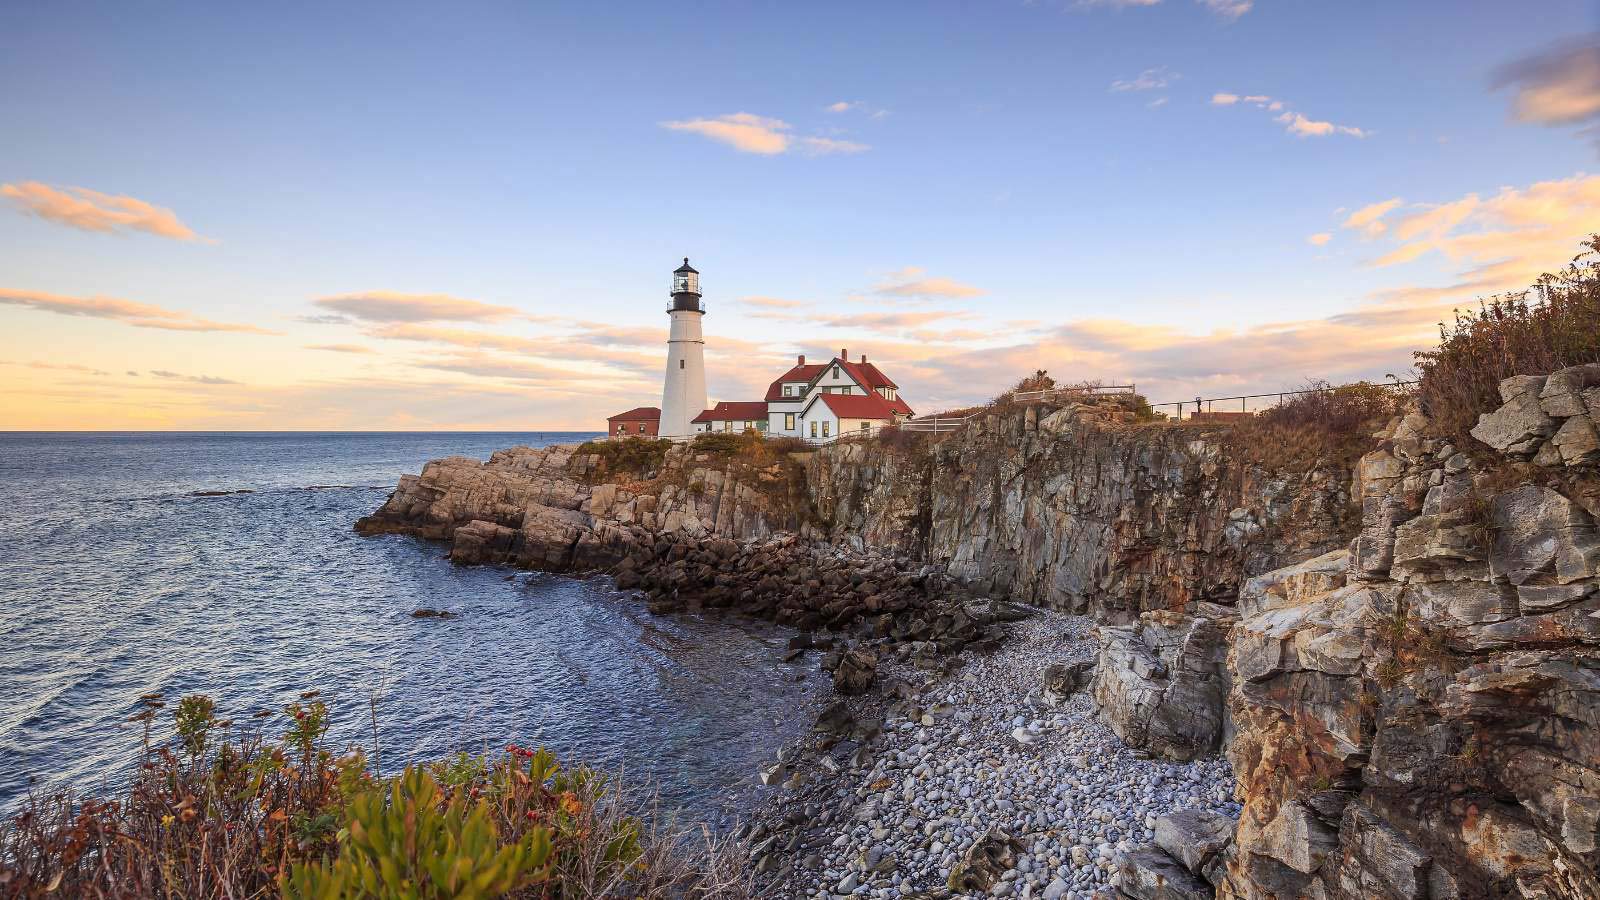 <p>The Portland Head Light is probably the most iconic lighthouse in the United States. It’s photographed all the time and appears on postcards of New England. George Washington commissioned the lighthouse in 1790 and it was designed to tower over the lightkeeper’s quarters in Fort Williams Park.</p>